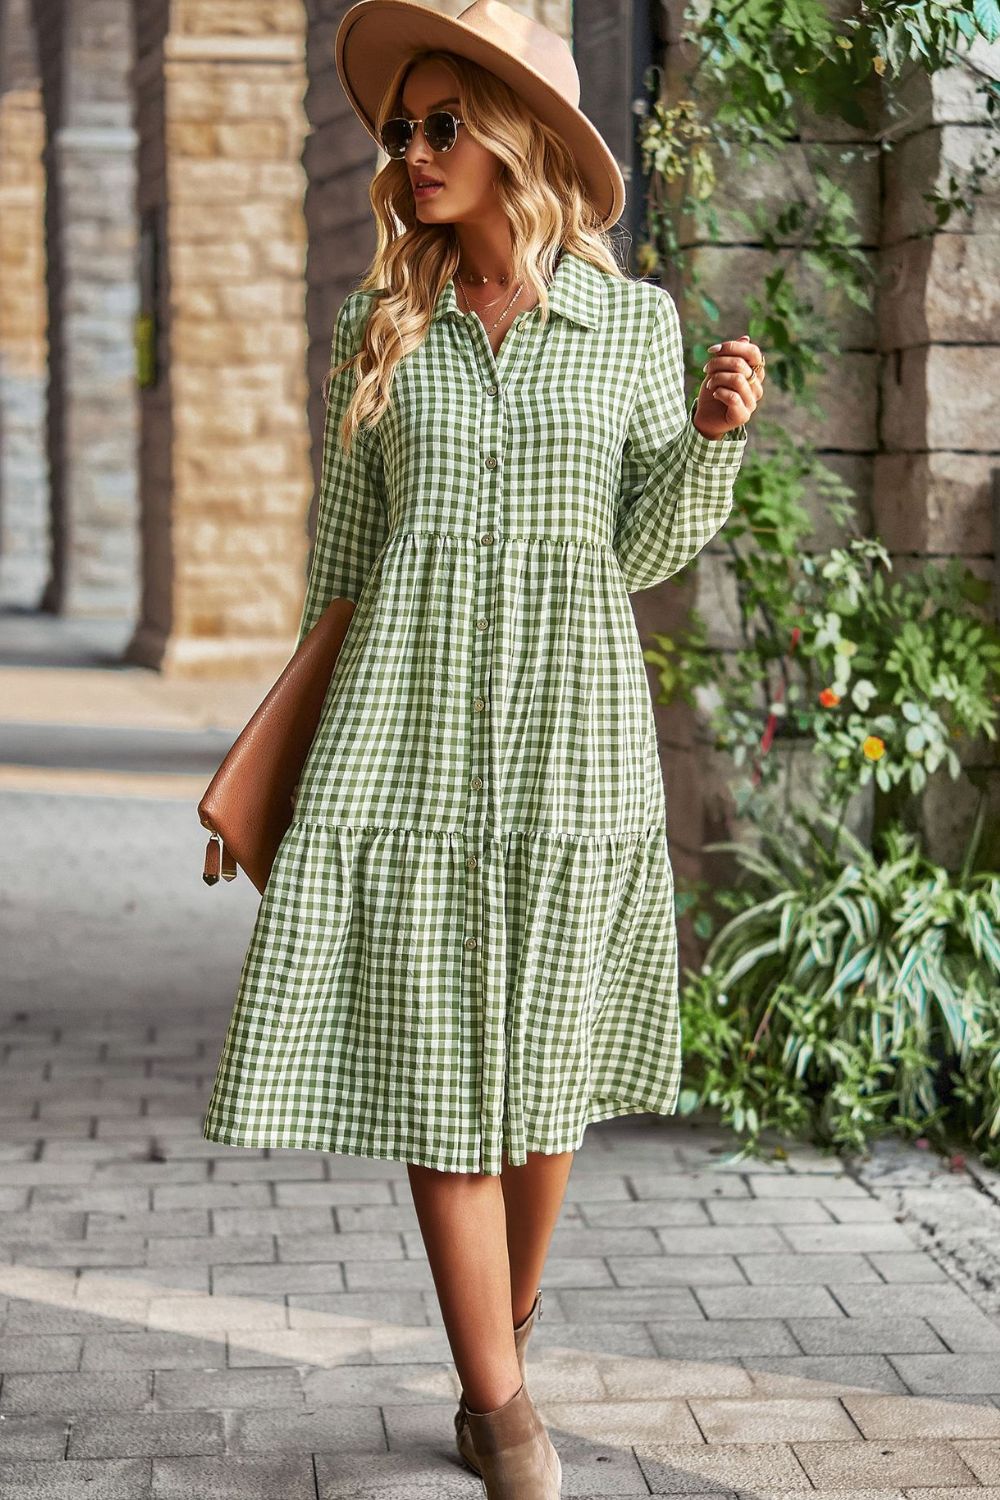 Collared Neck Long Sleeve Midi Dress - Online Only